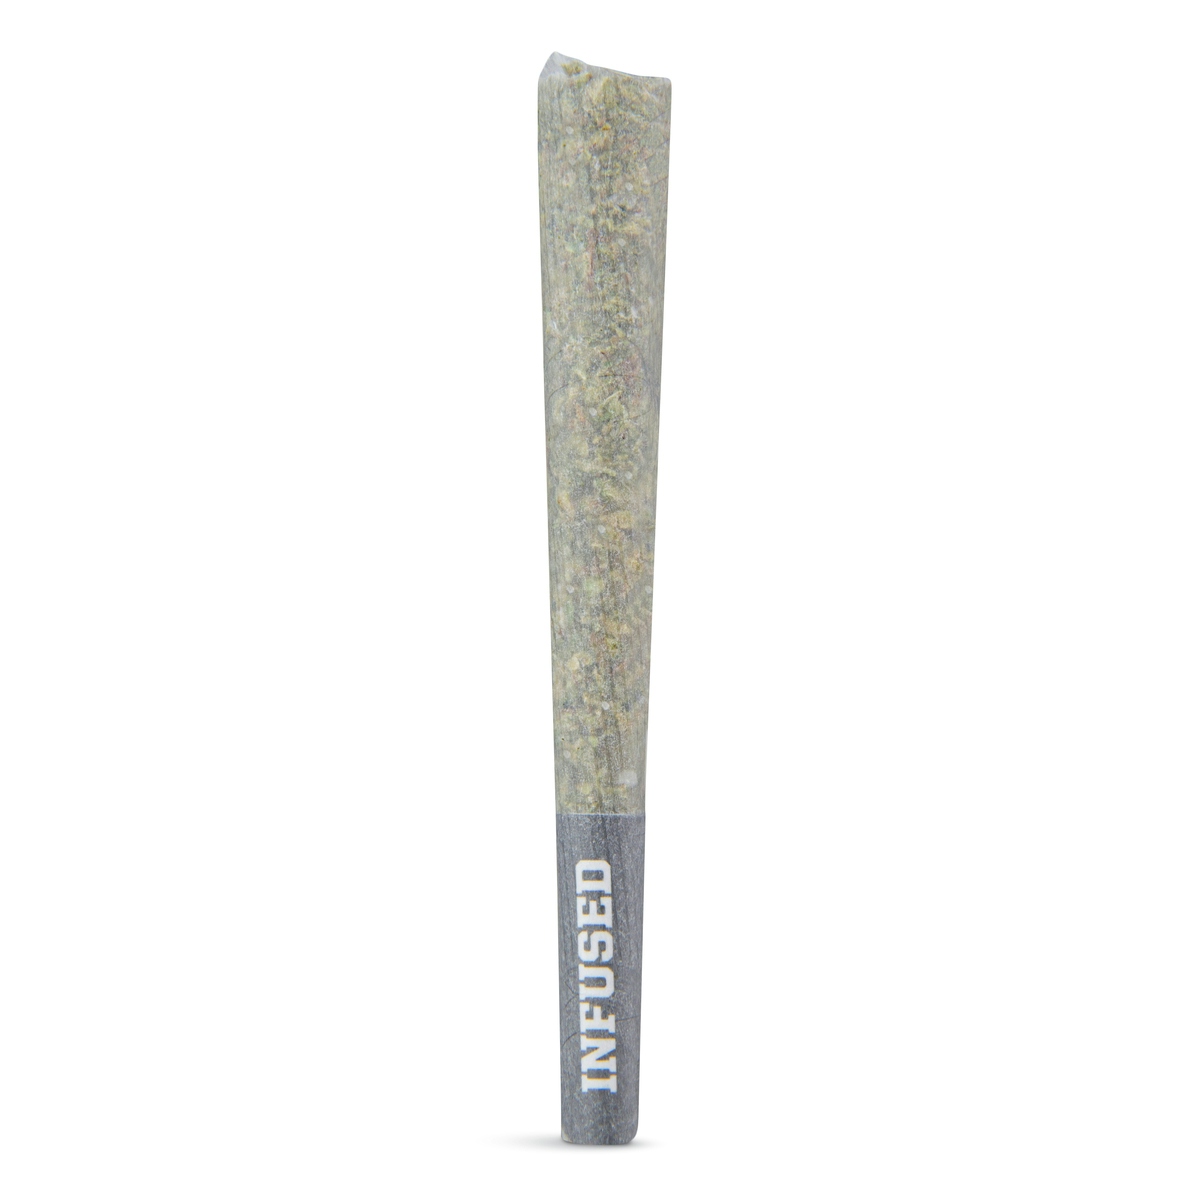 Raspberry Cough | Sativa - Diamond THCA-Infused Pre-Roll - 1G Joint